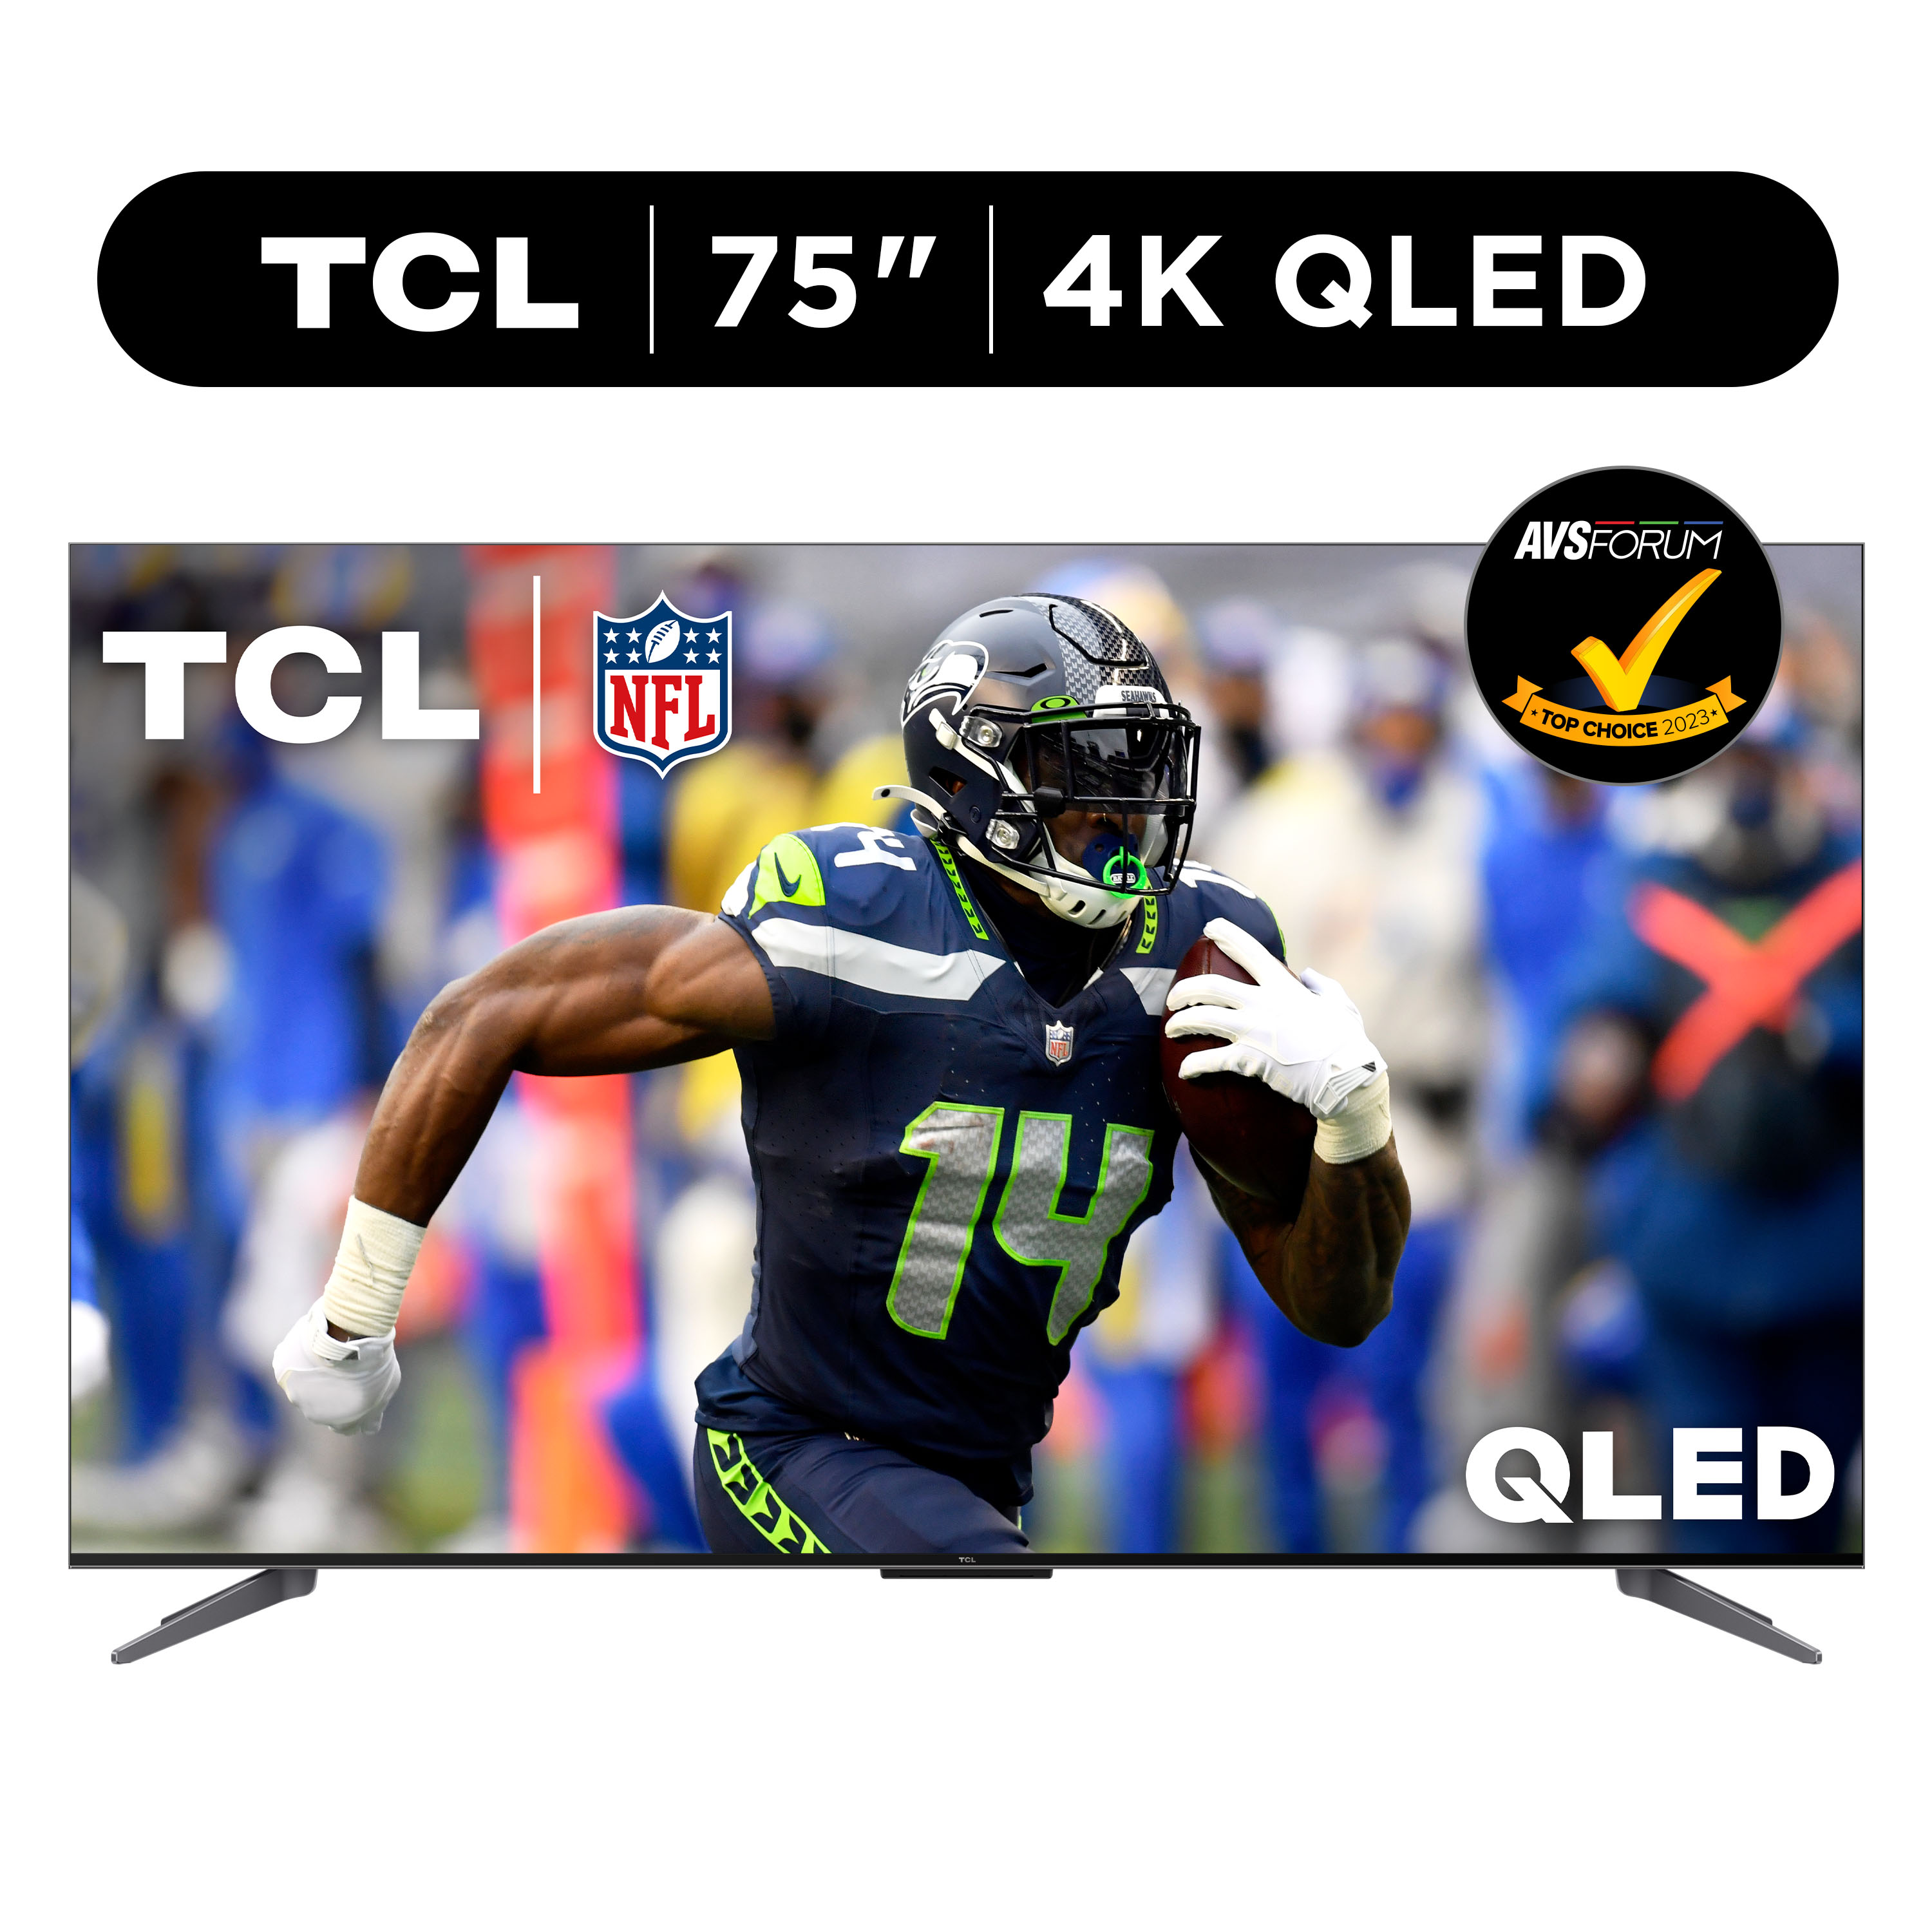 TCL 75” Class Q Class 4K QLED HDR Smart TV with Google TV, 75Q750G - image 1 of 22